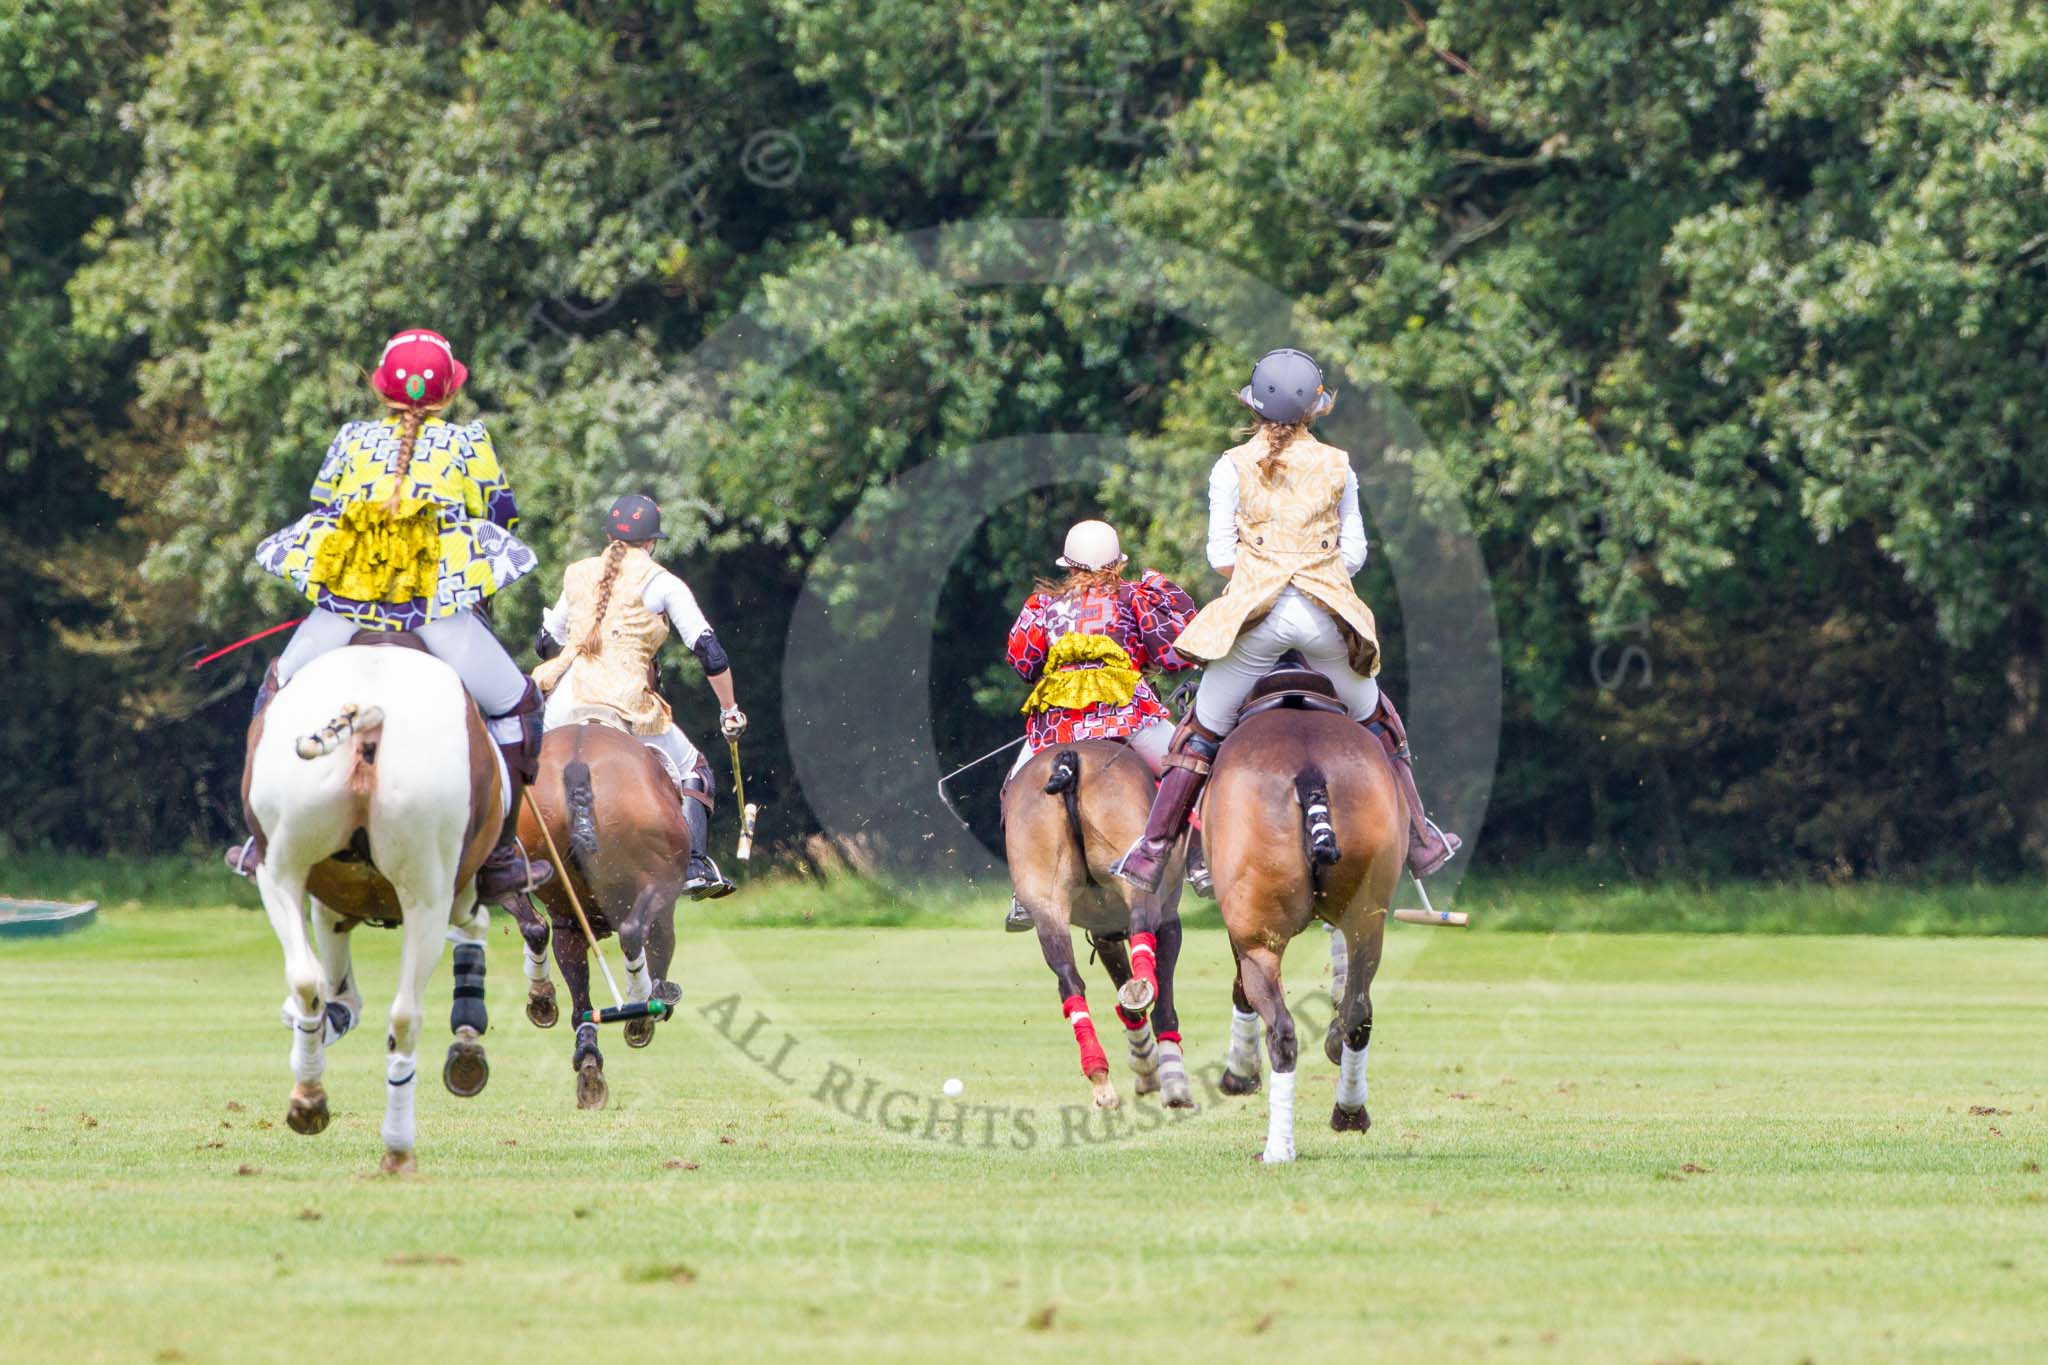 7th Heritage Polo Cup semi-finals: AMG PETROENERGY v The Amazons of Polo..
Hurtwood Park Polo Club,
Ewhurst Green,
Surrey,
United Kingdom,
on 04 August 2012 at 13:50, image #181